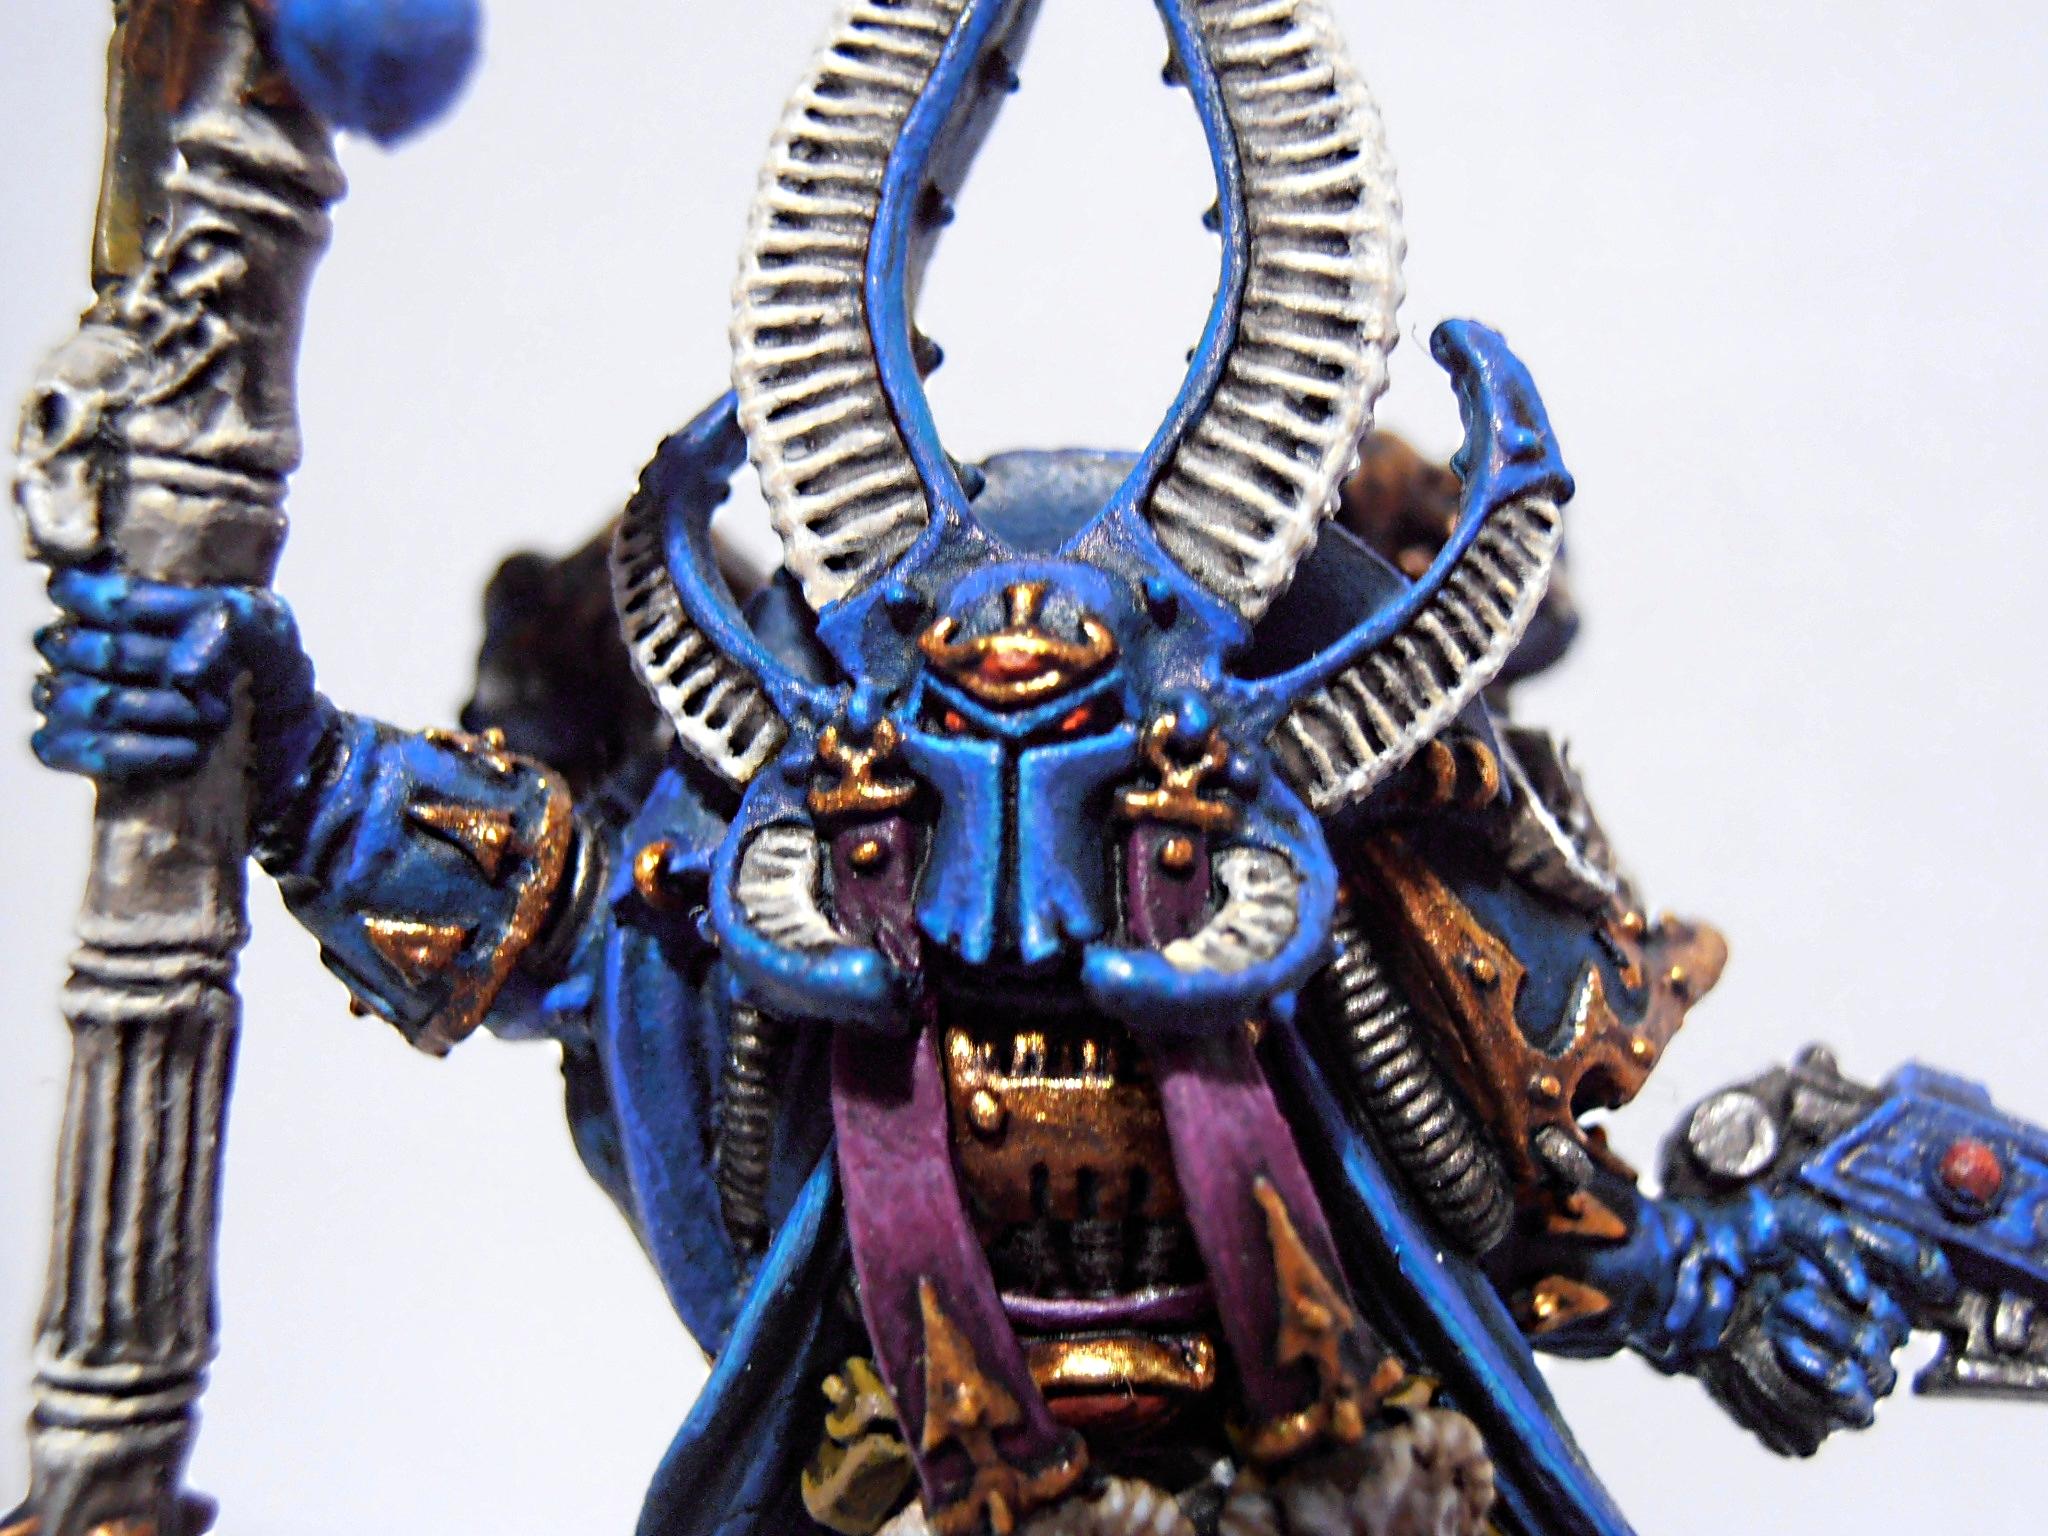 Ahriman, Ahriman of the Thousand Sons